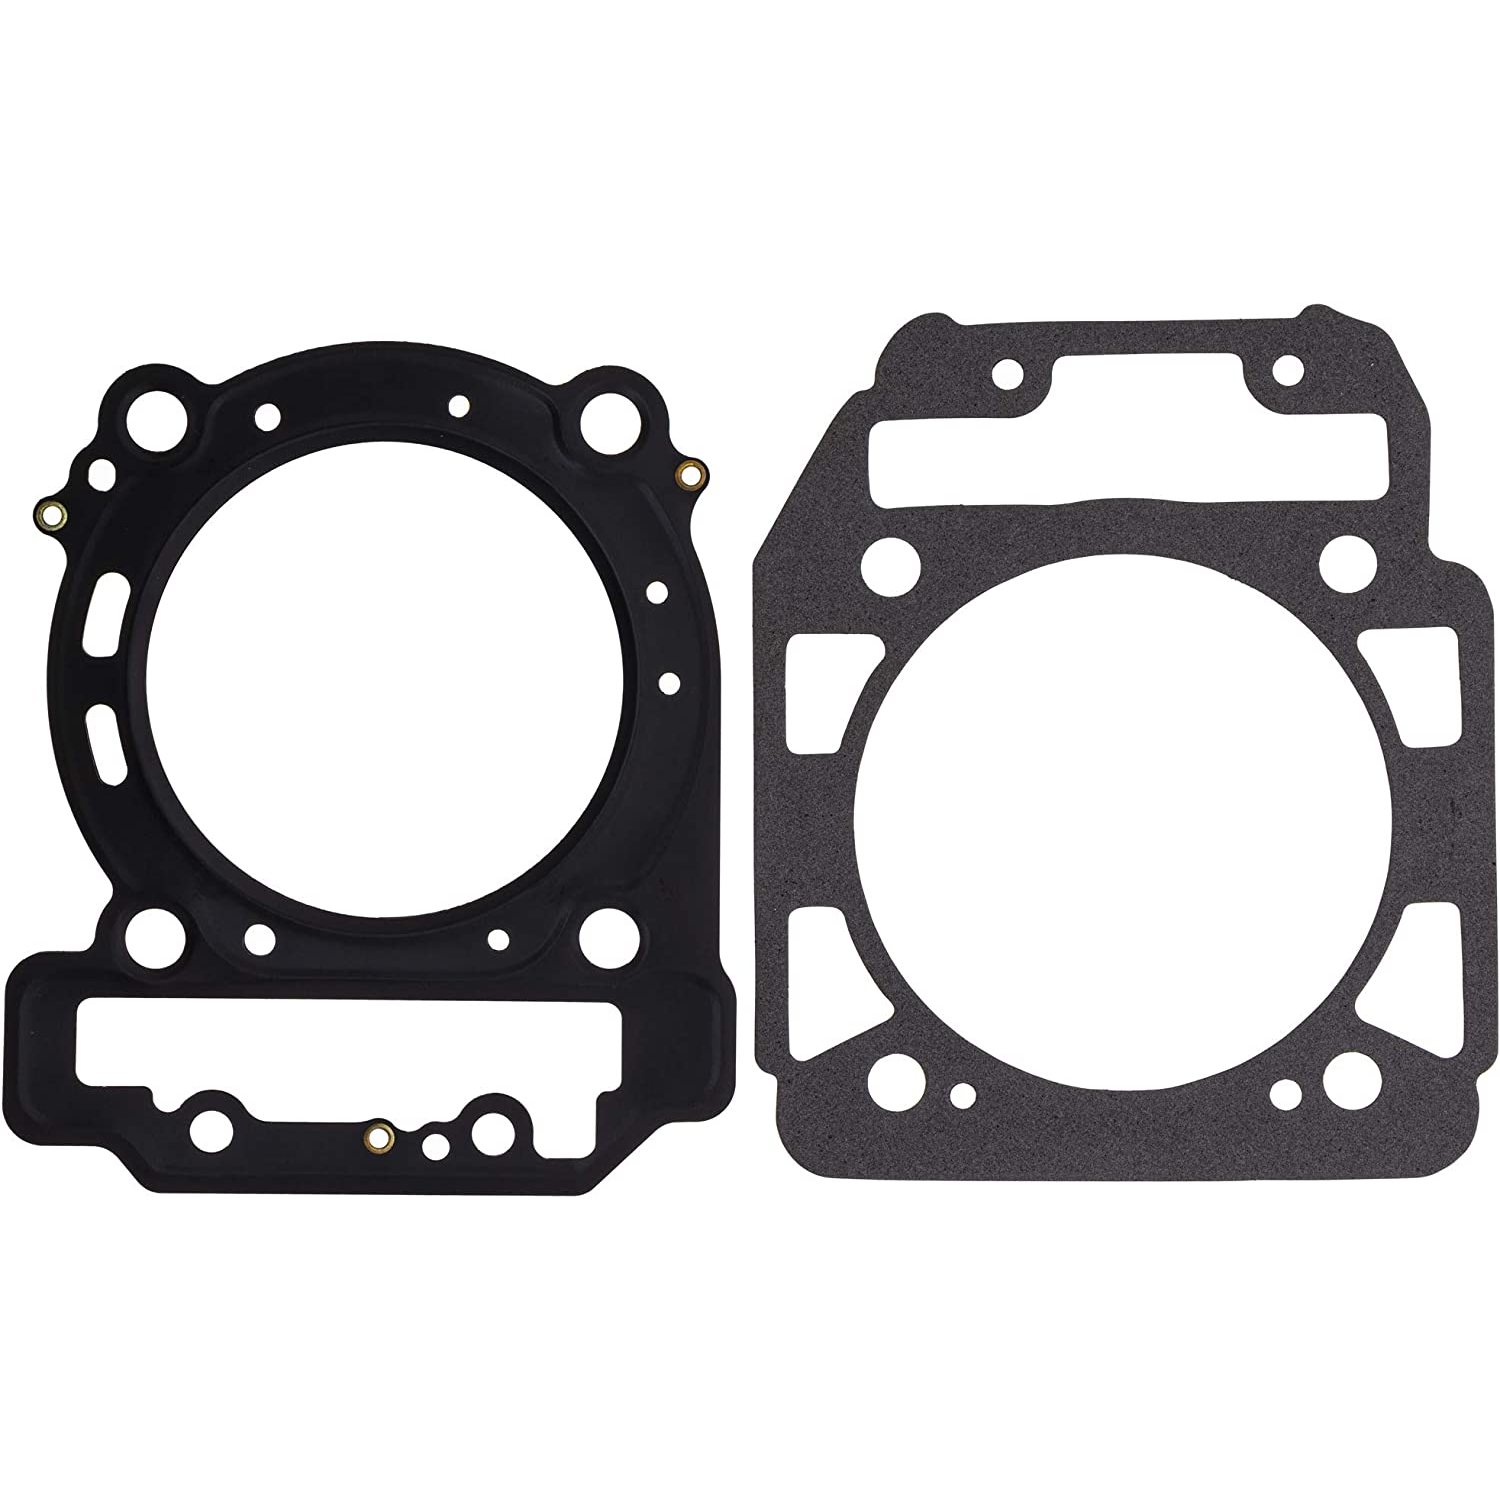 NICHE Cylinder Head and Base Gasket Kit Set Combo For 2003-2017 Ski-Doo Renegade Can-Am Commander 420630195 420630850, Base Gasket Replaces OEM Part Numbe... - image 2 of 4